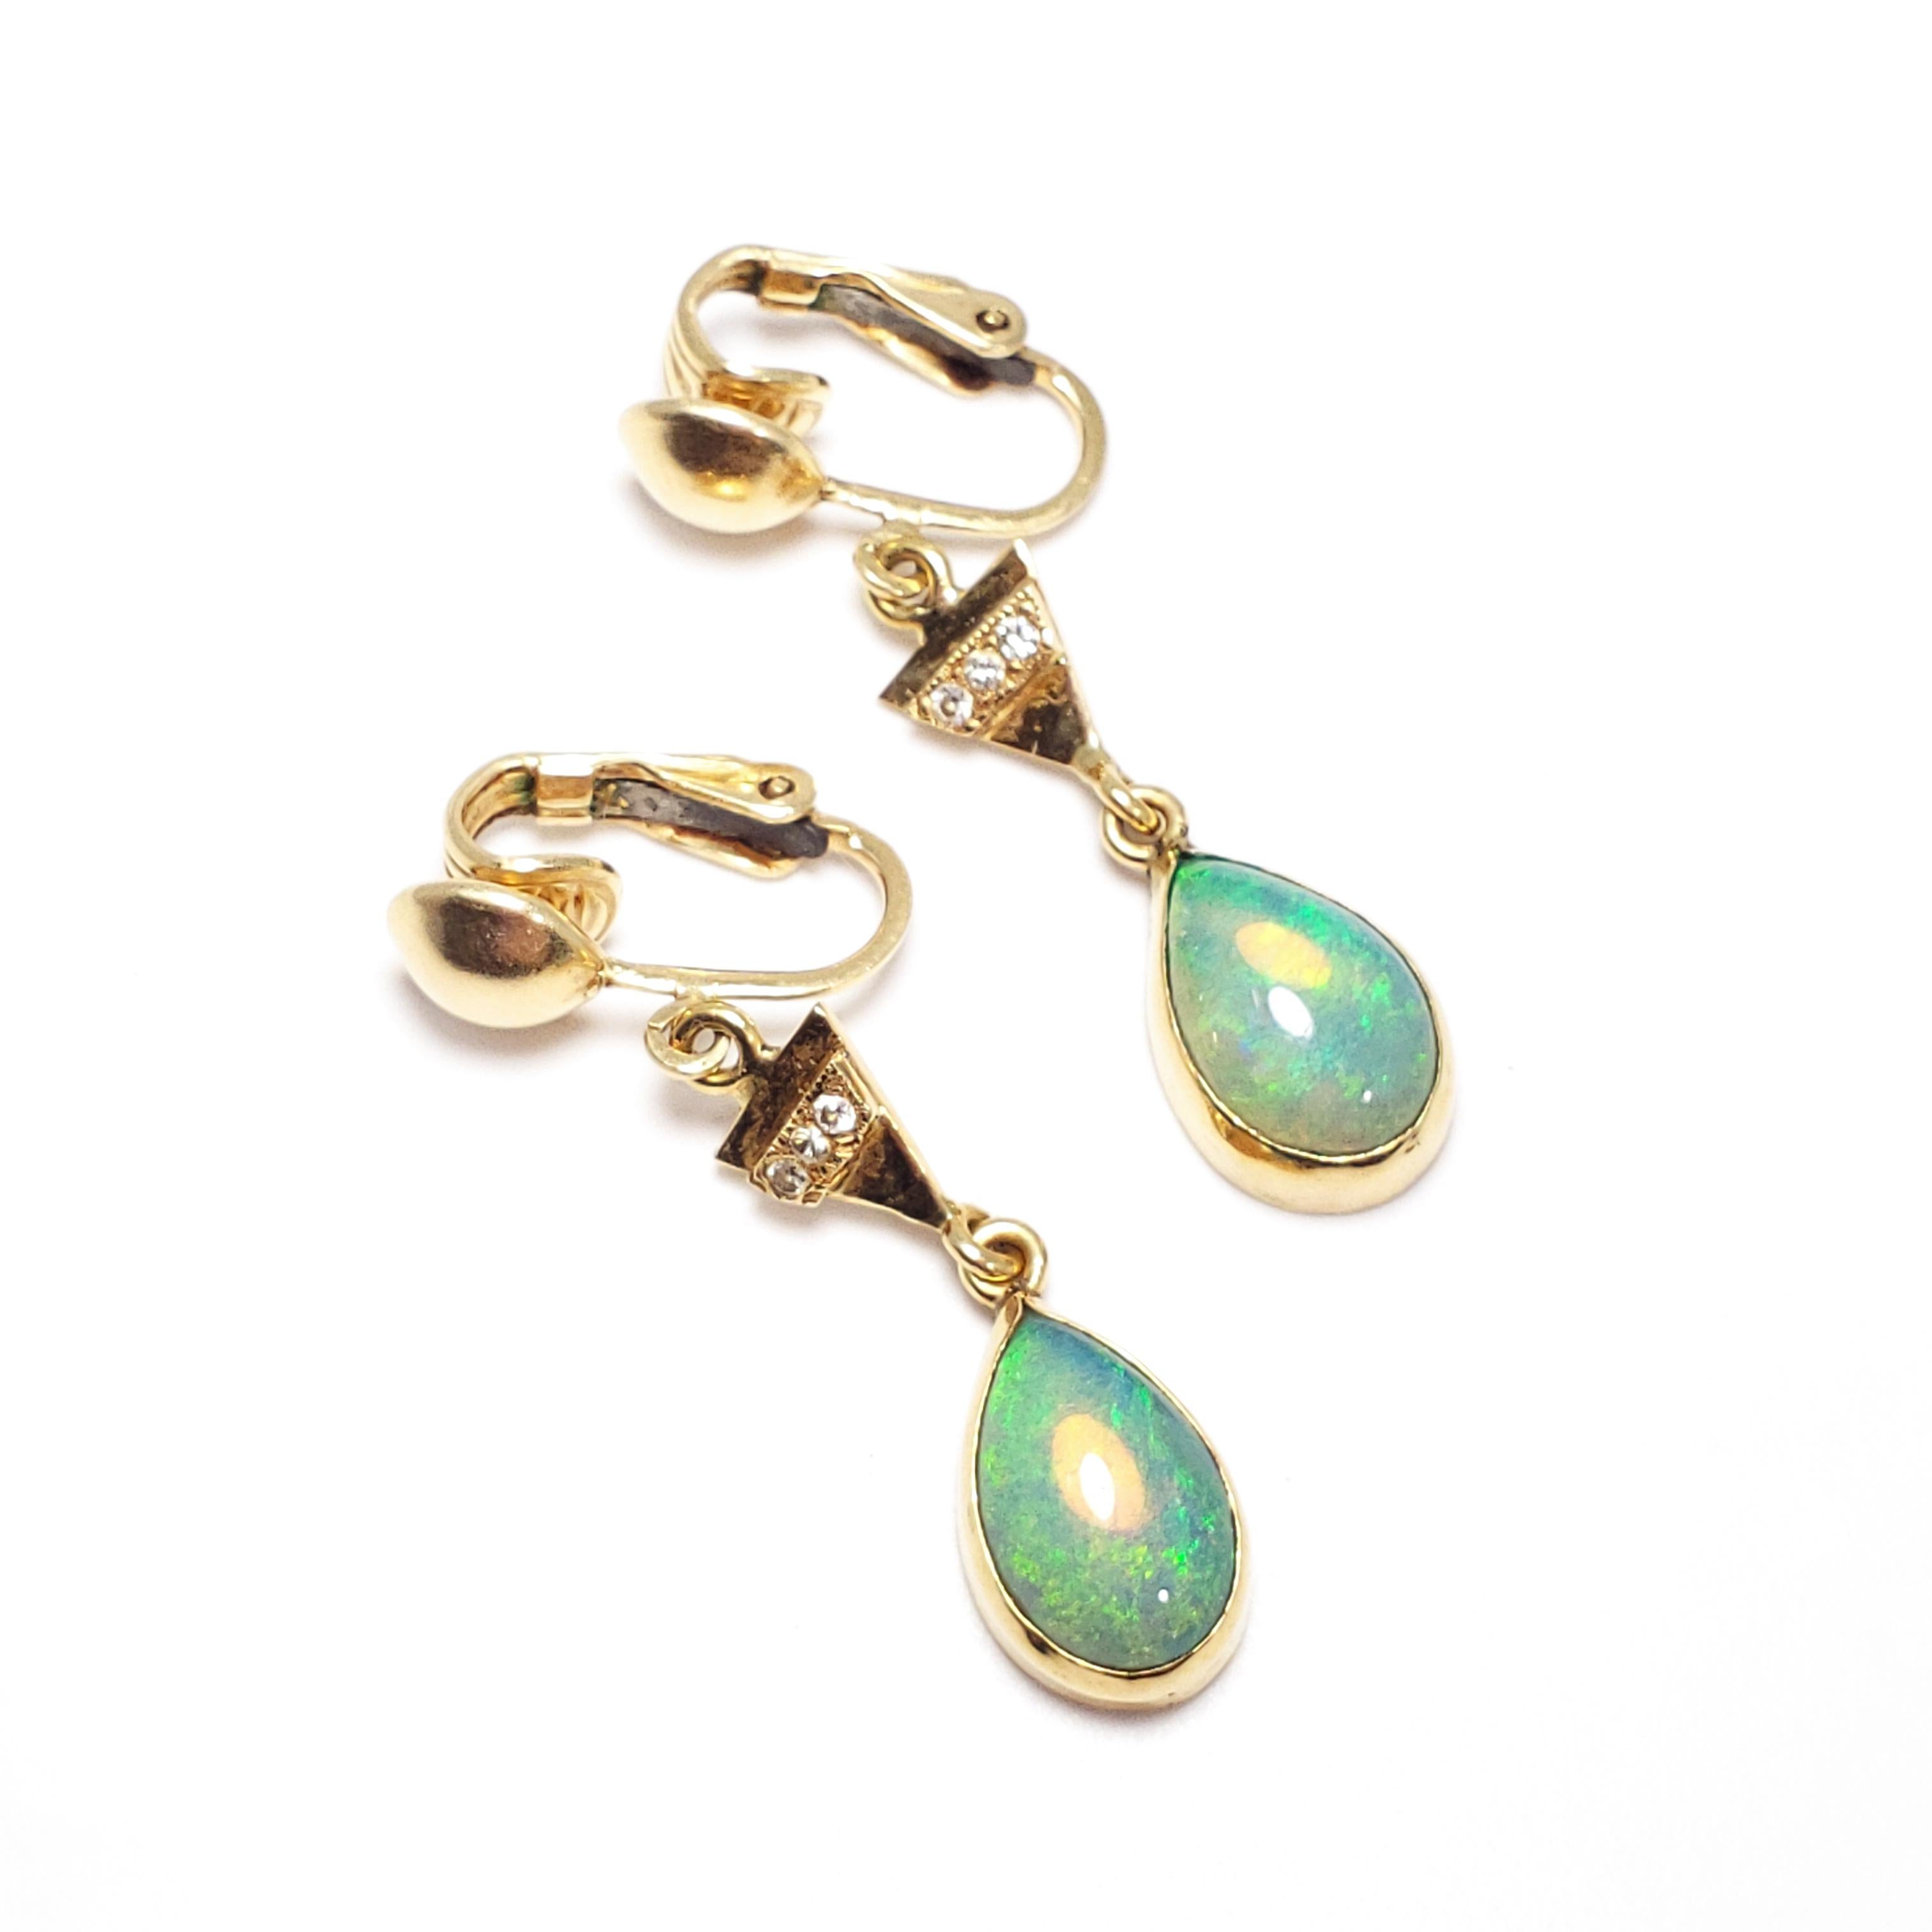 Bold and beautiful, nothing accentuates an outfit better than opals and diamonds! These two-piece dangling clip-on earrings each feature a teardrop-shaped opal set in a 14KT bezel, hanging off a triangular 14KT motif encrusted with 3 diamonds.